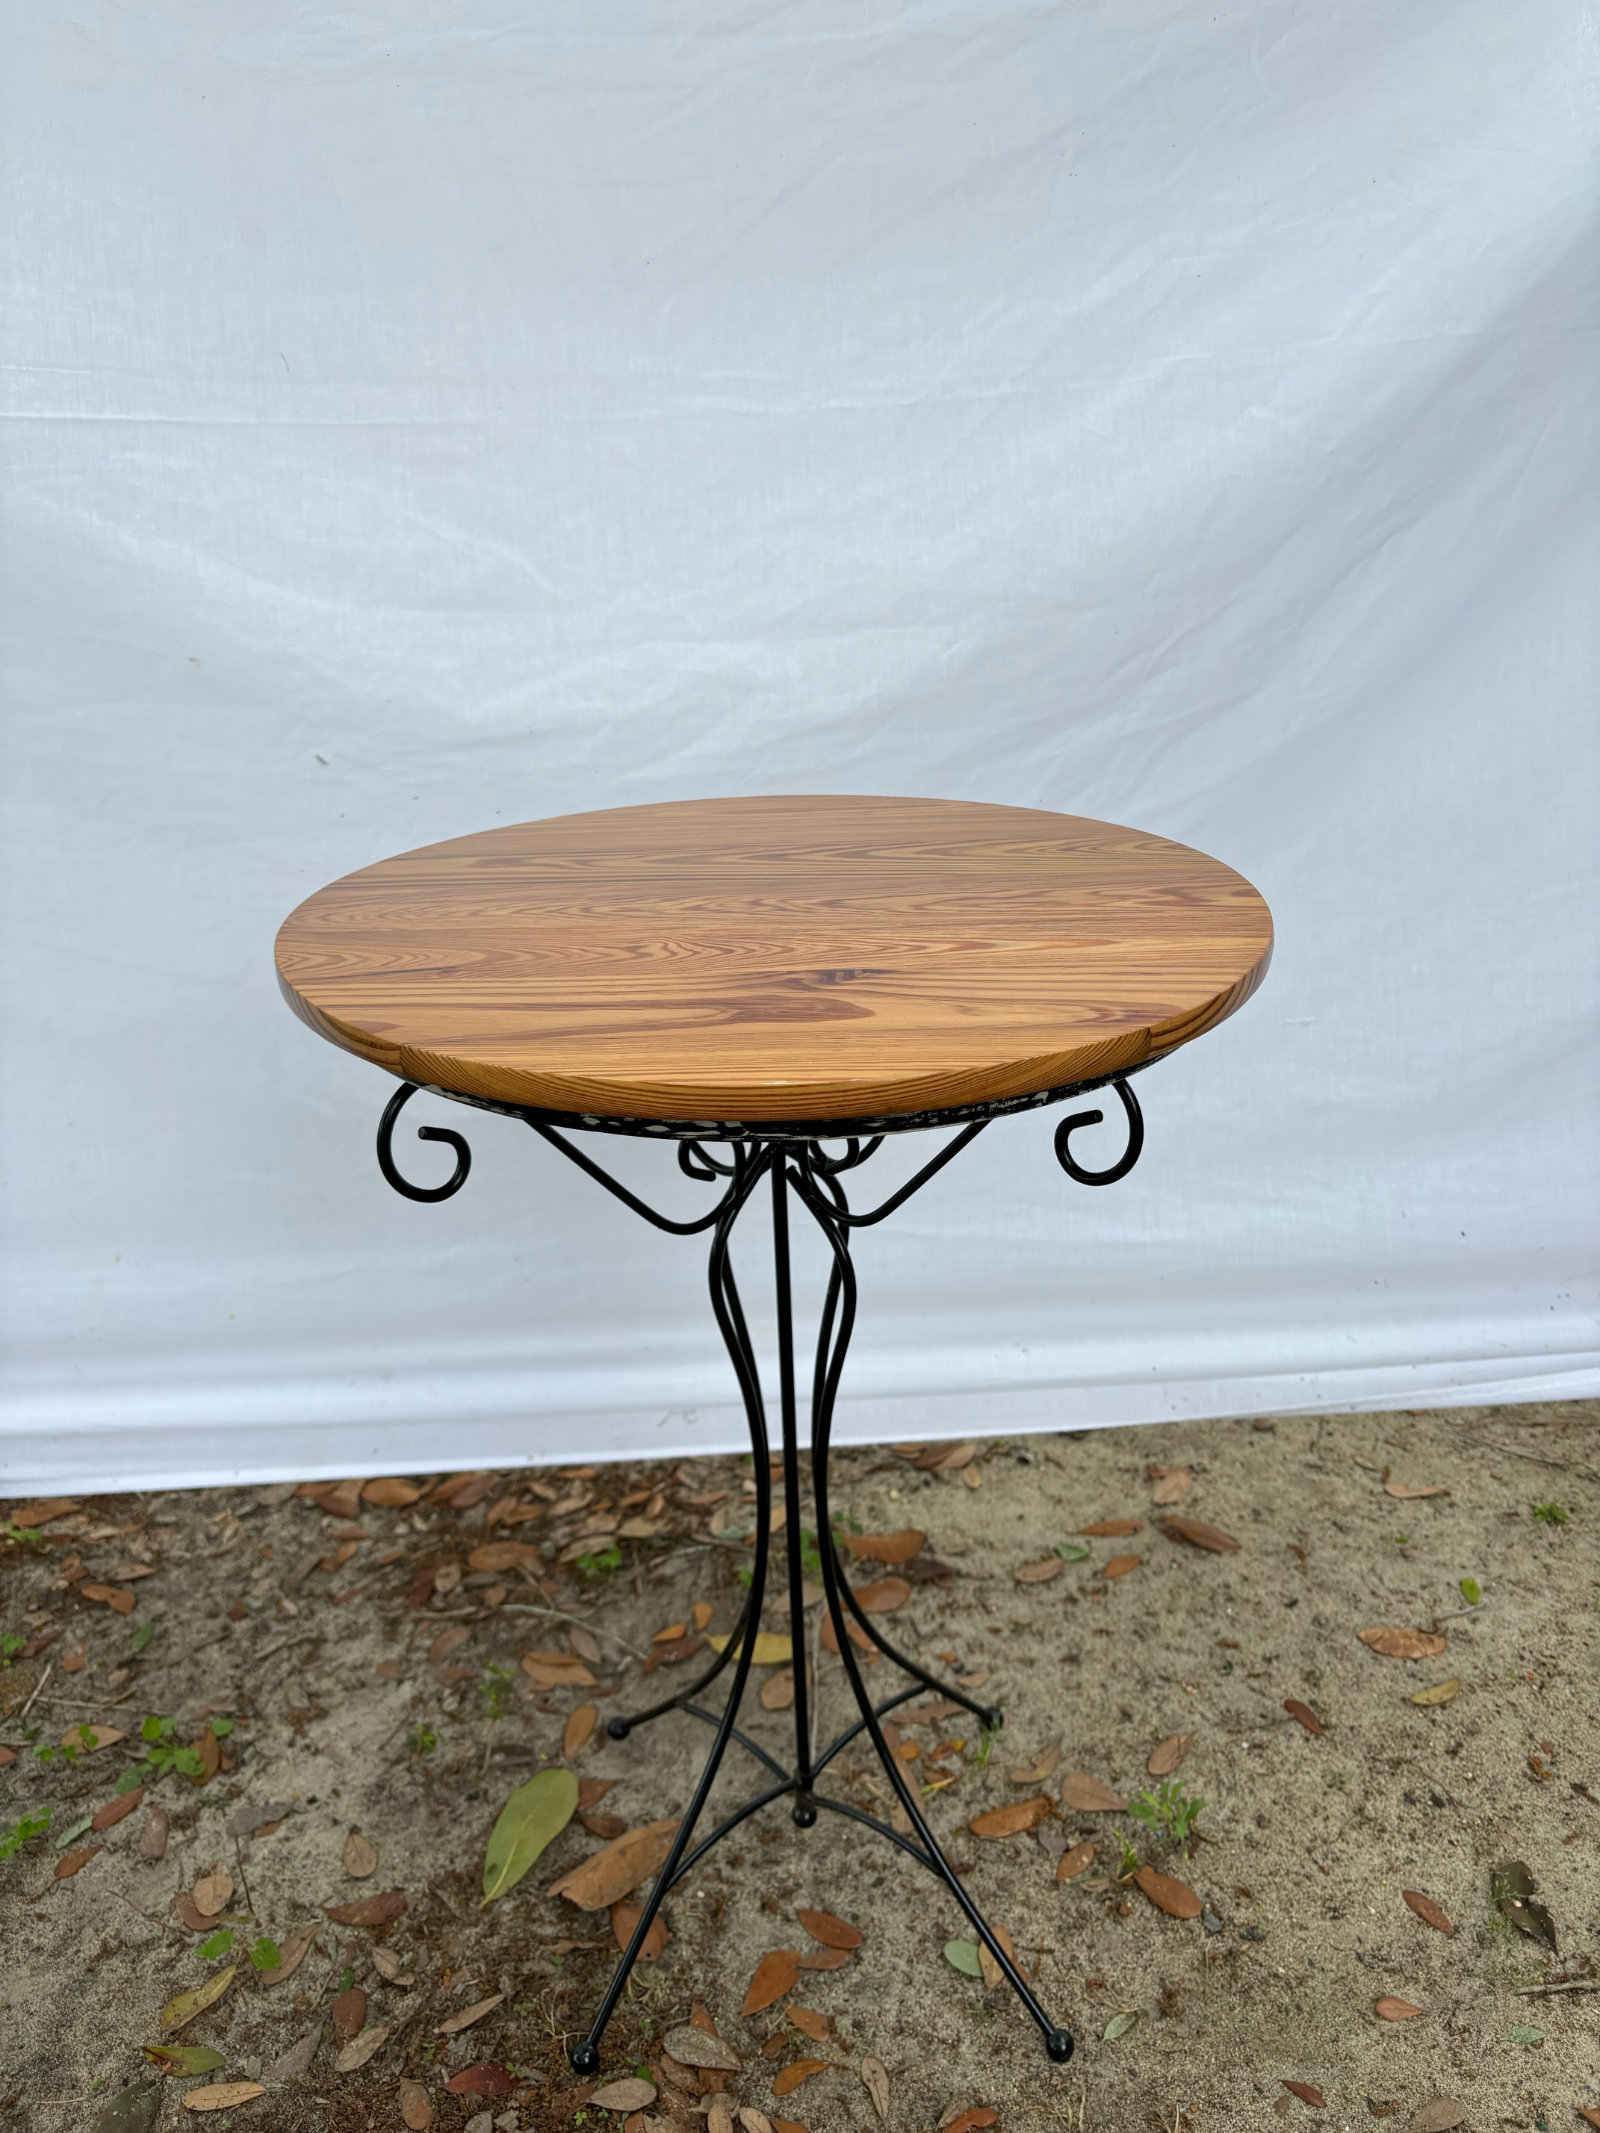 Wood Plant Stands